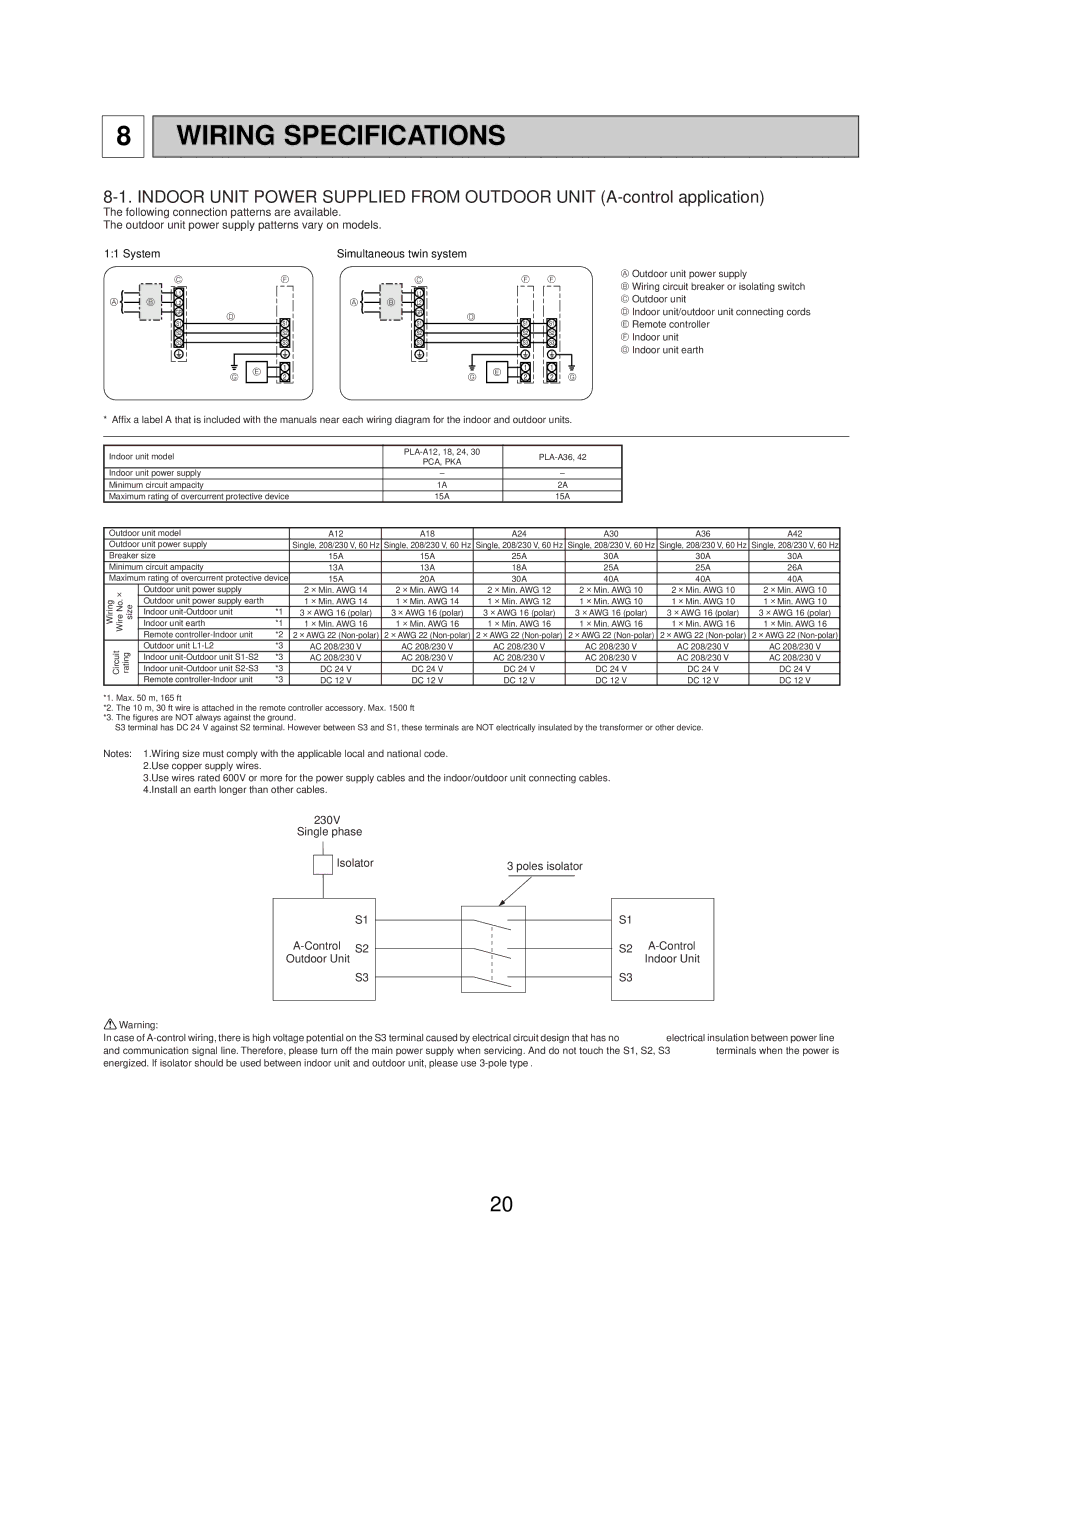 Mitsubishi Electronics PUZ-A36NHA2-BS, PUZ-A42NHA2-BS, PUZ-A30NHA2 Wiring Specifications, System Simultaneous twin system 